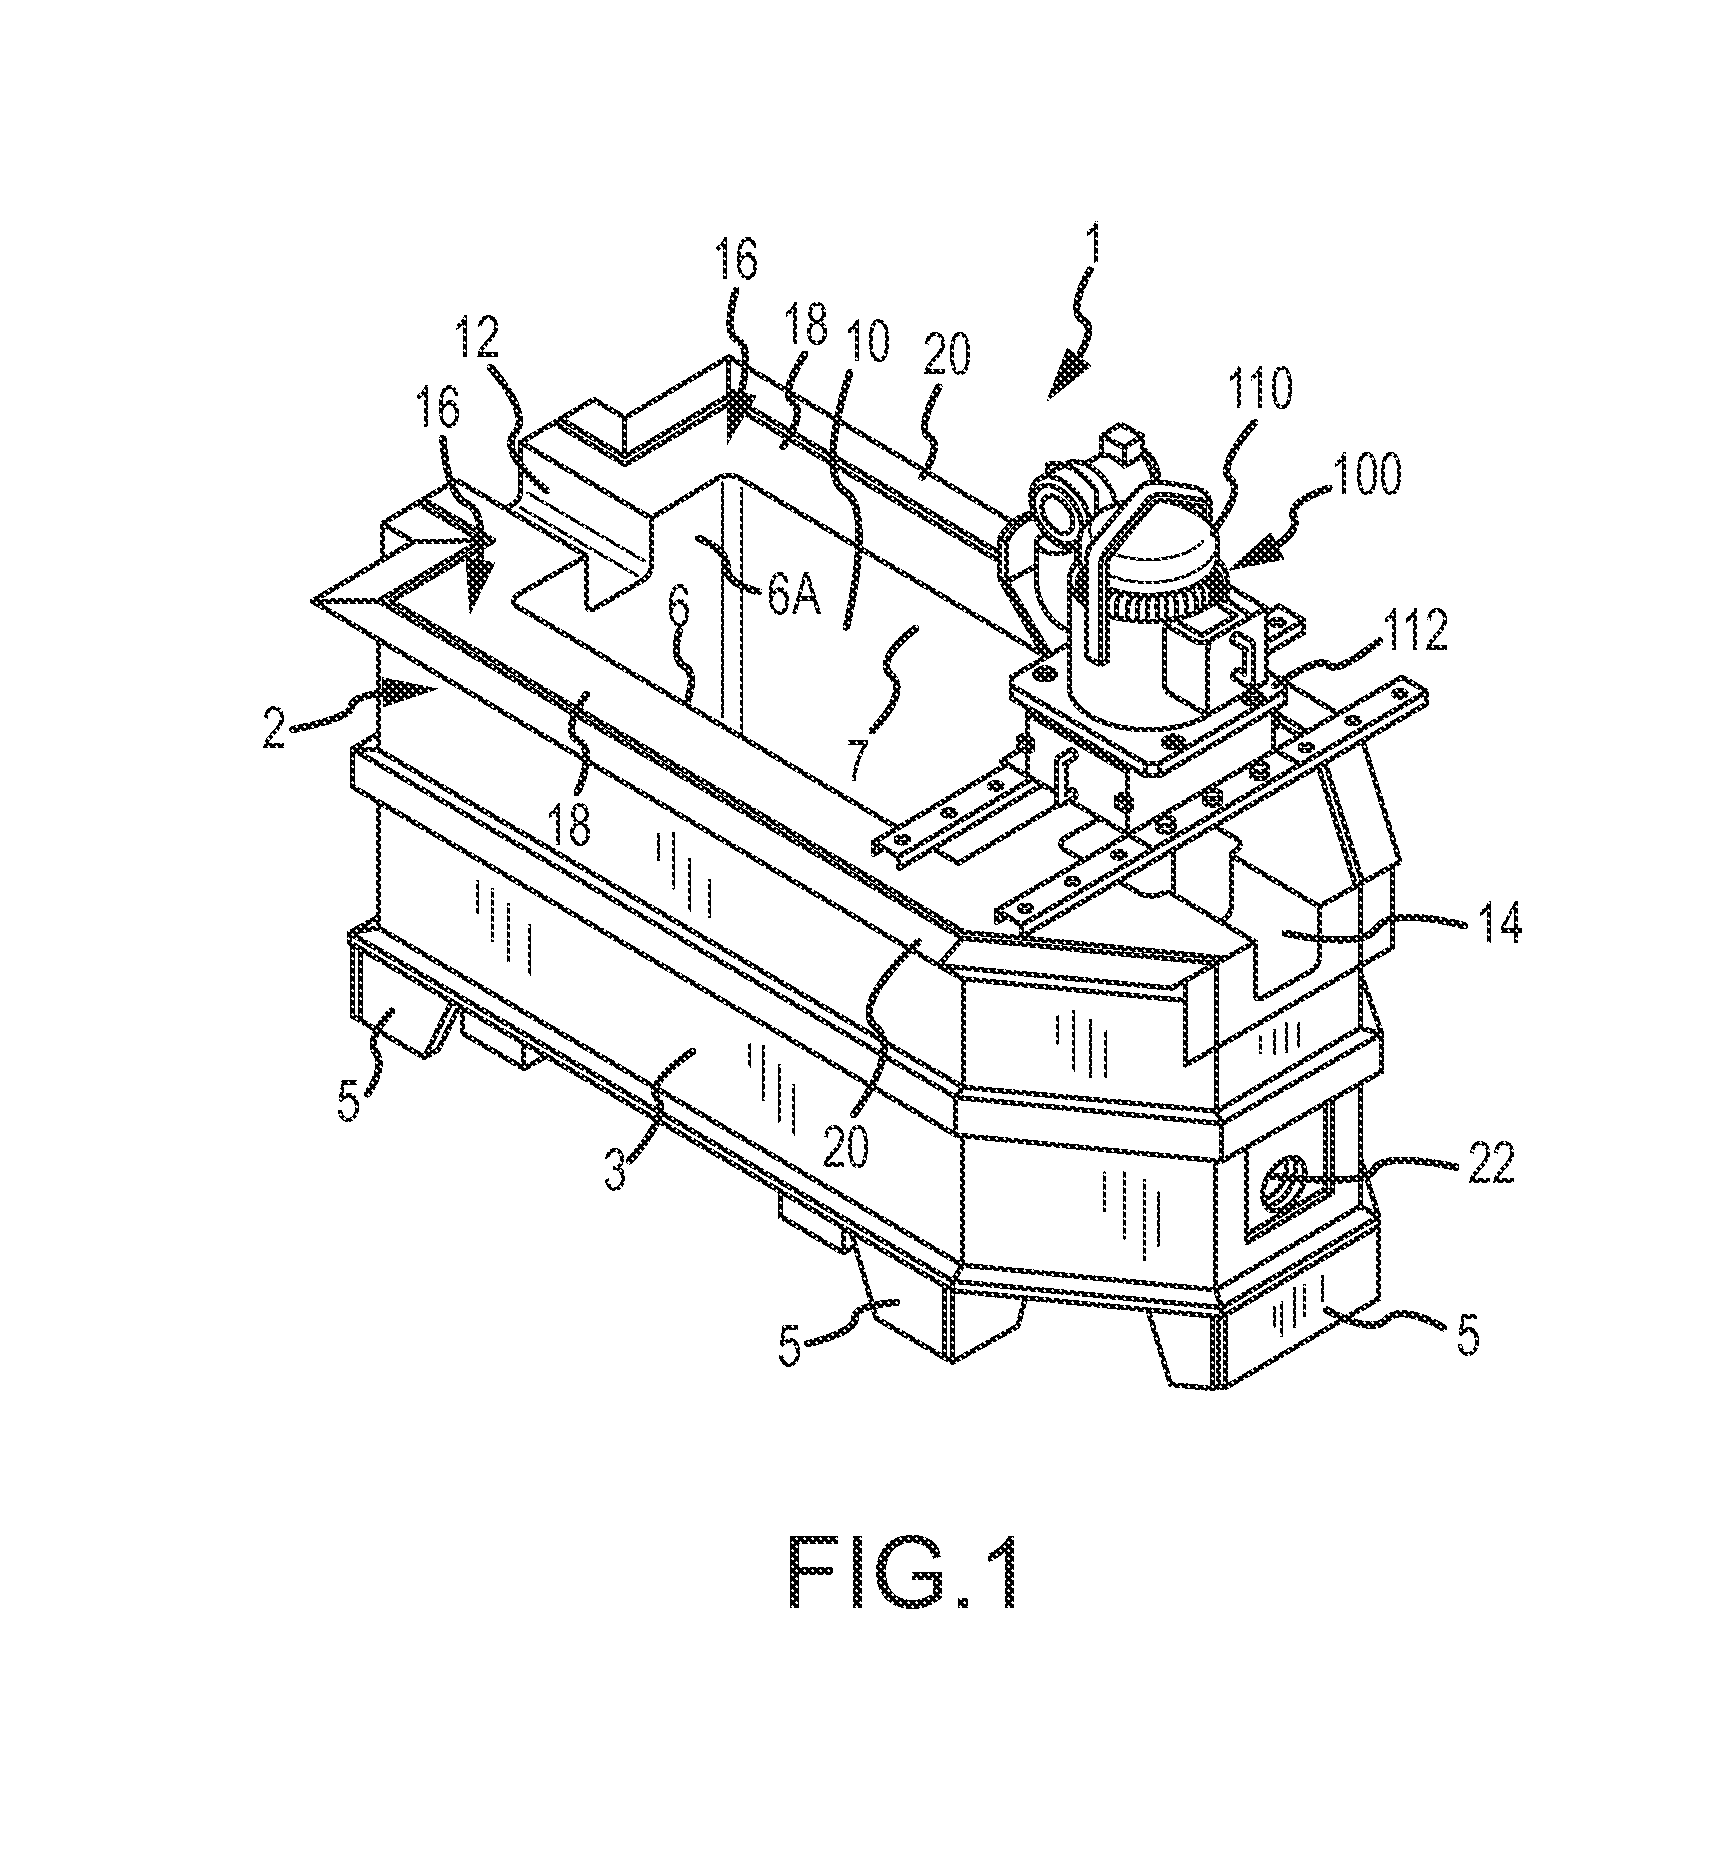 Molten metal transfer and degassing system